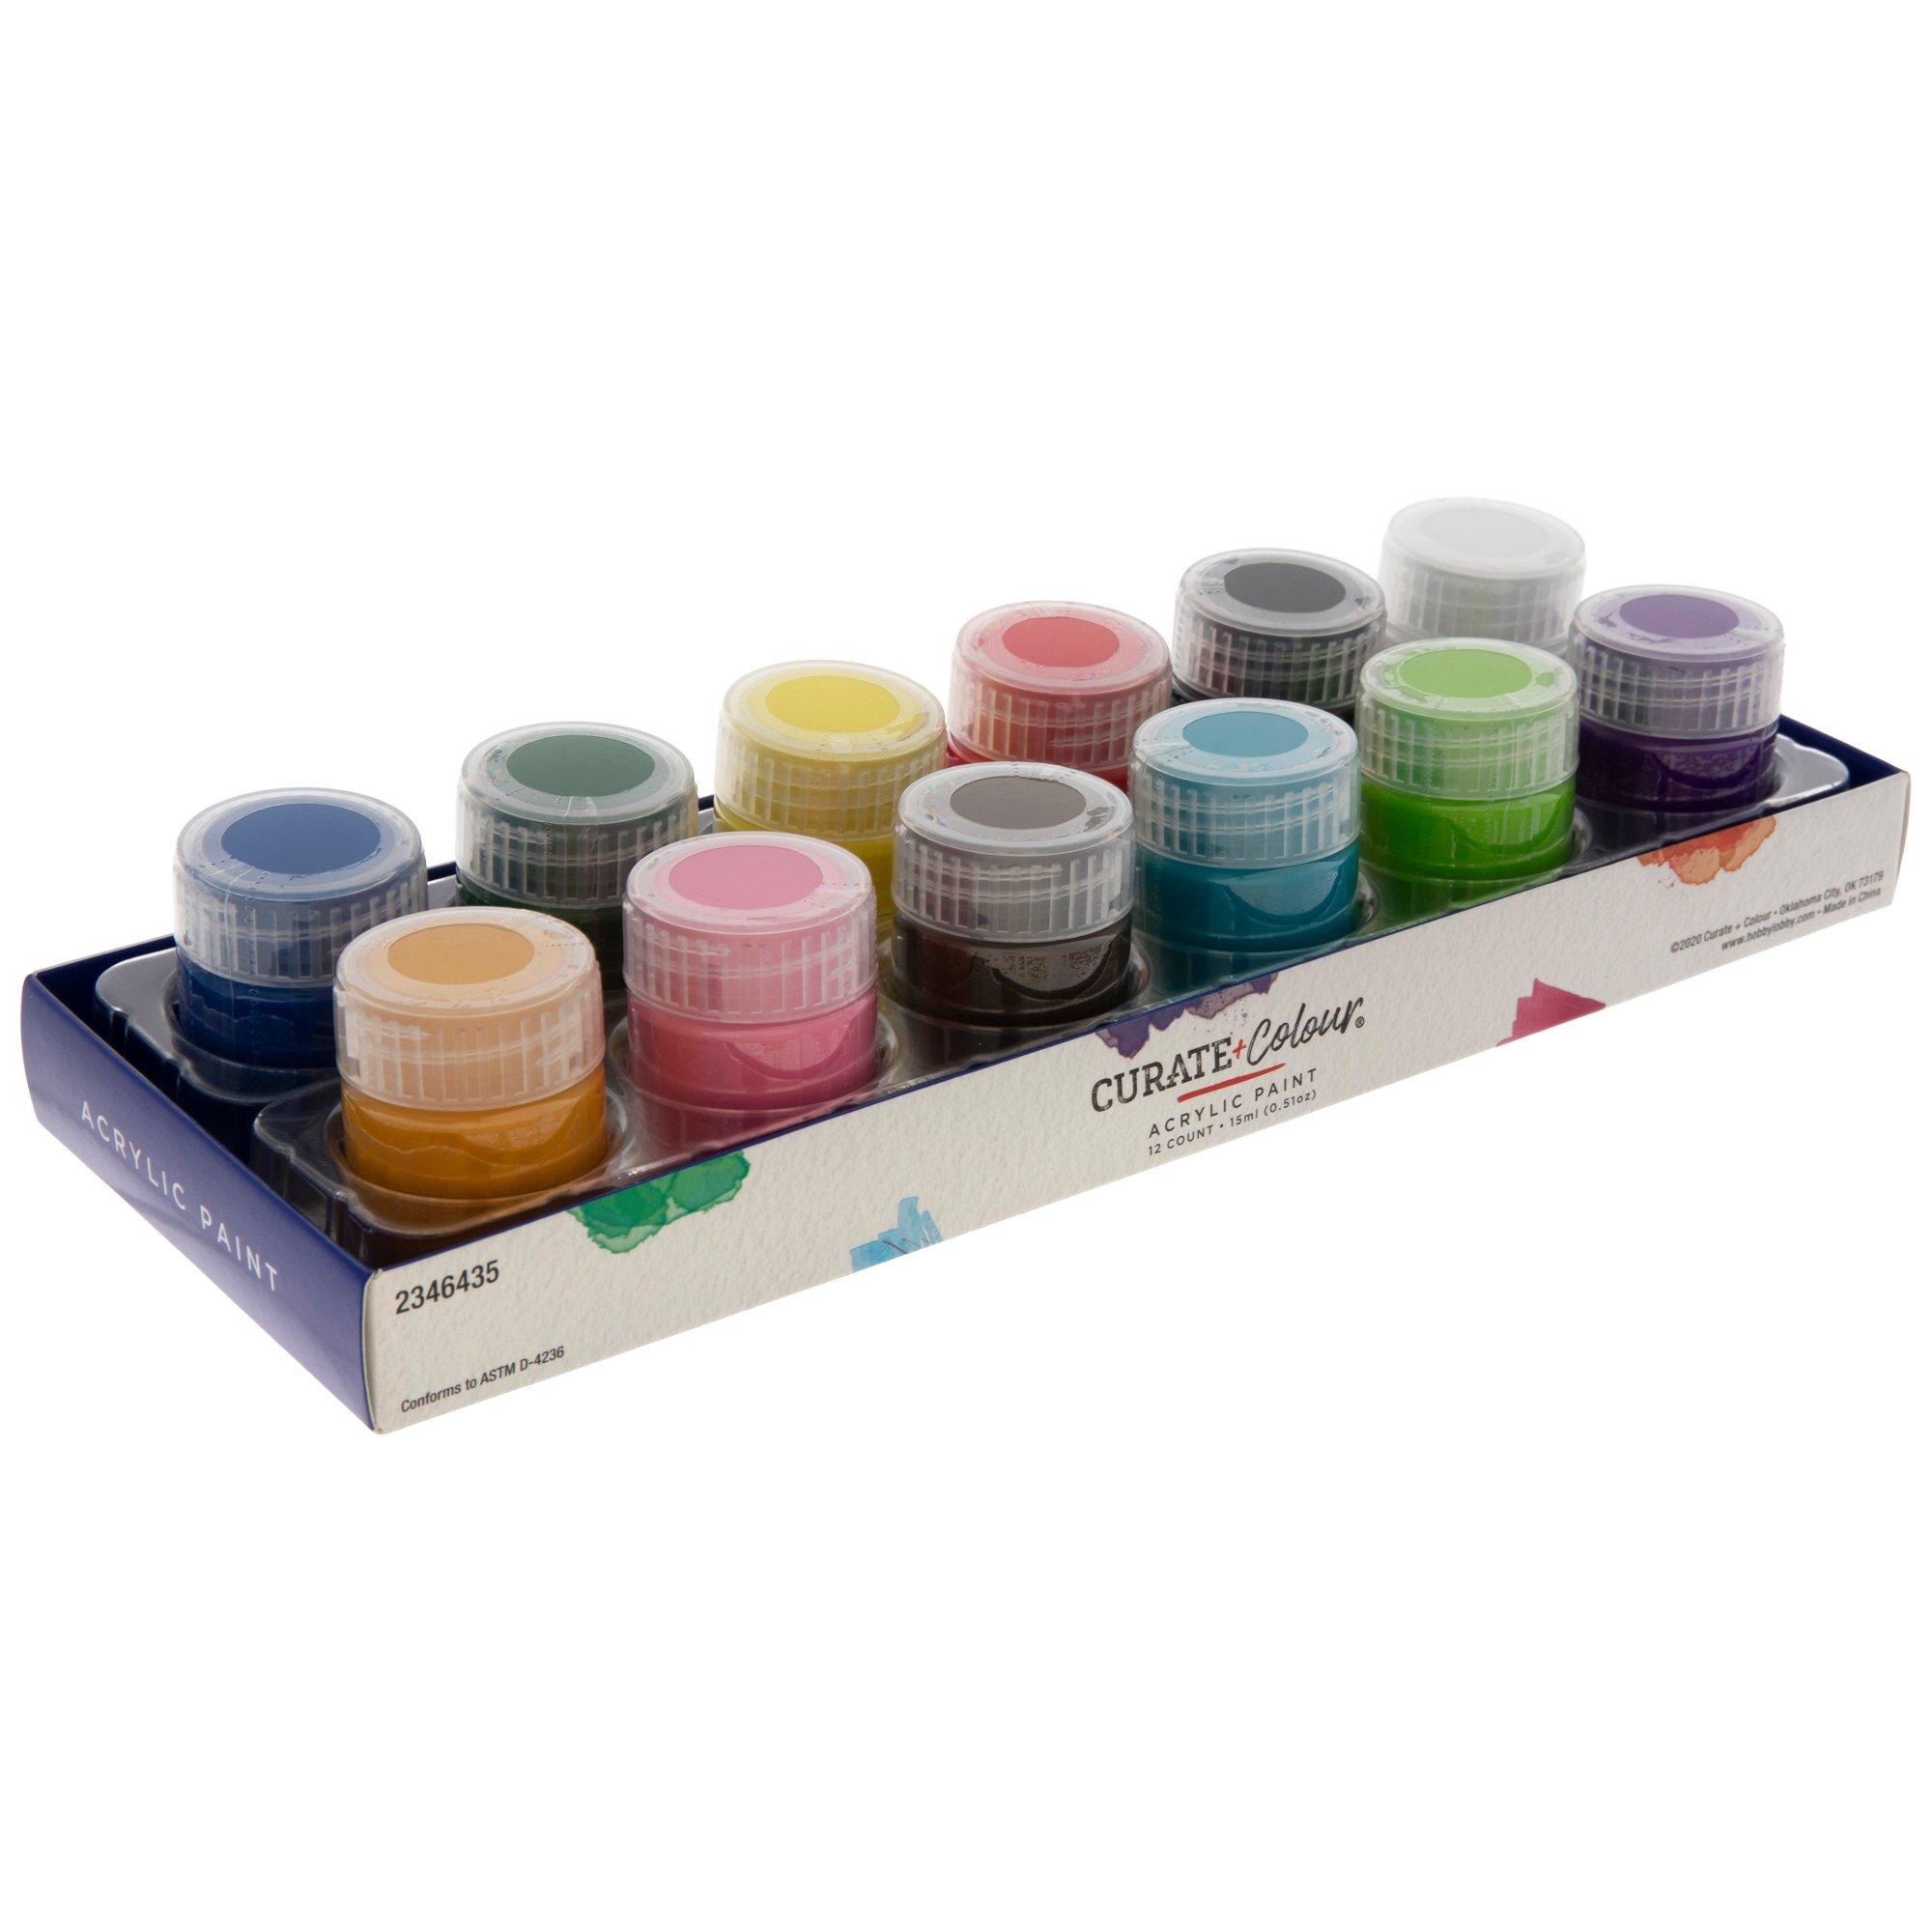 157 Pcs Mini Acrylic Paint Set,22 Sets Acrylic Paint Strips in 12 Colors  with 2 Paint Tray,Small Acrylic Paint Set with 20 Pcs Paintbrushes Perfect